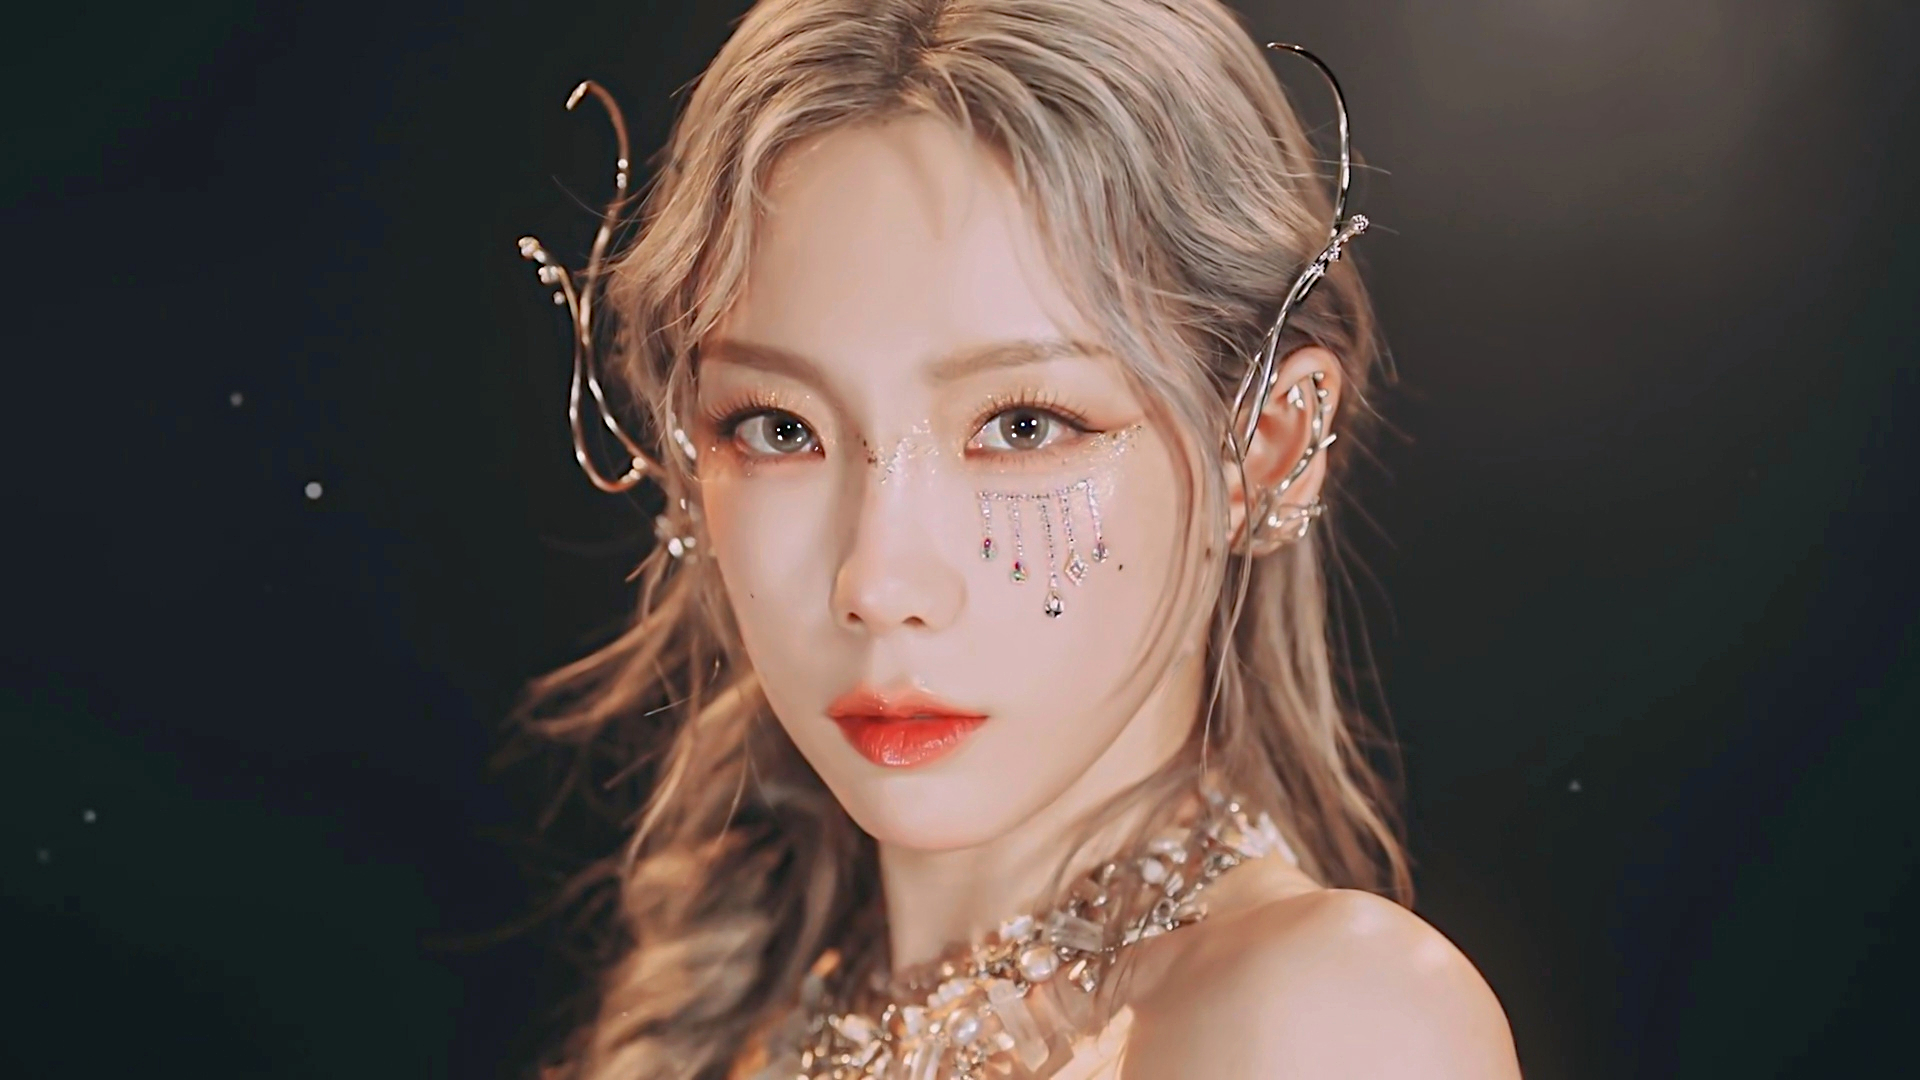 , Women’ Technology’s Taeyeon mesmerizes in ethereal music video for ‘INVU’